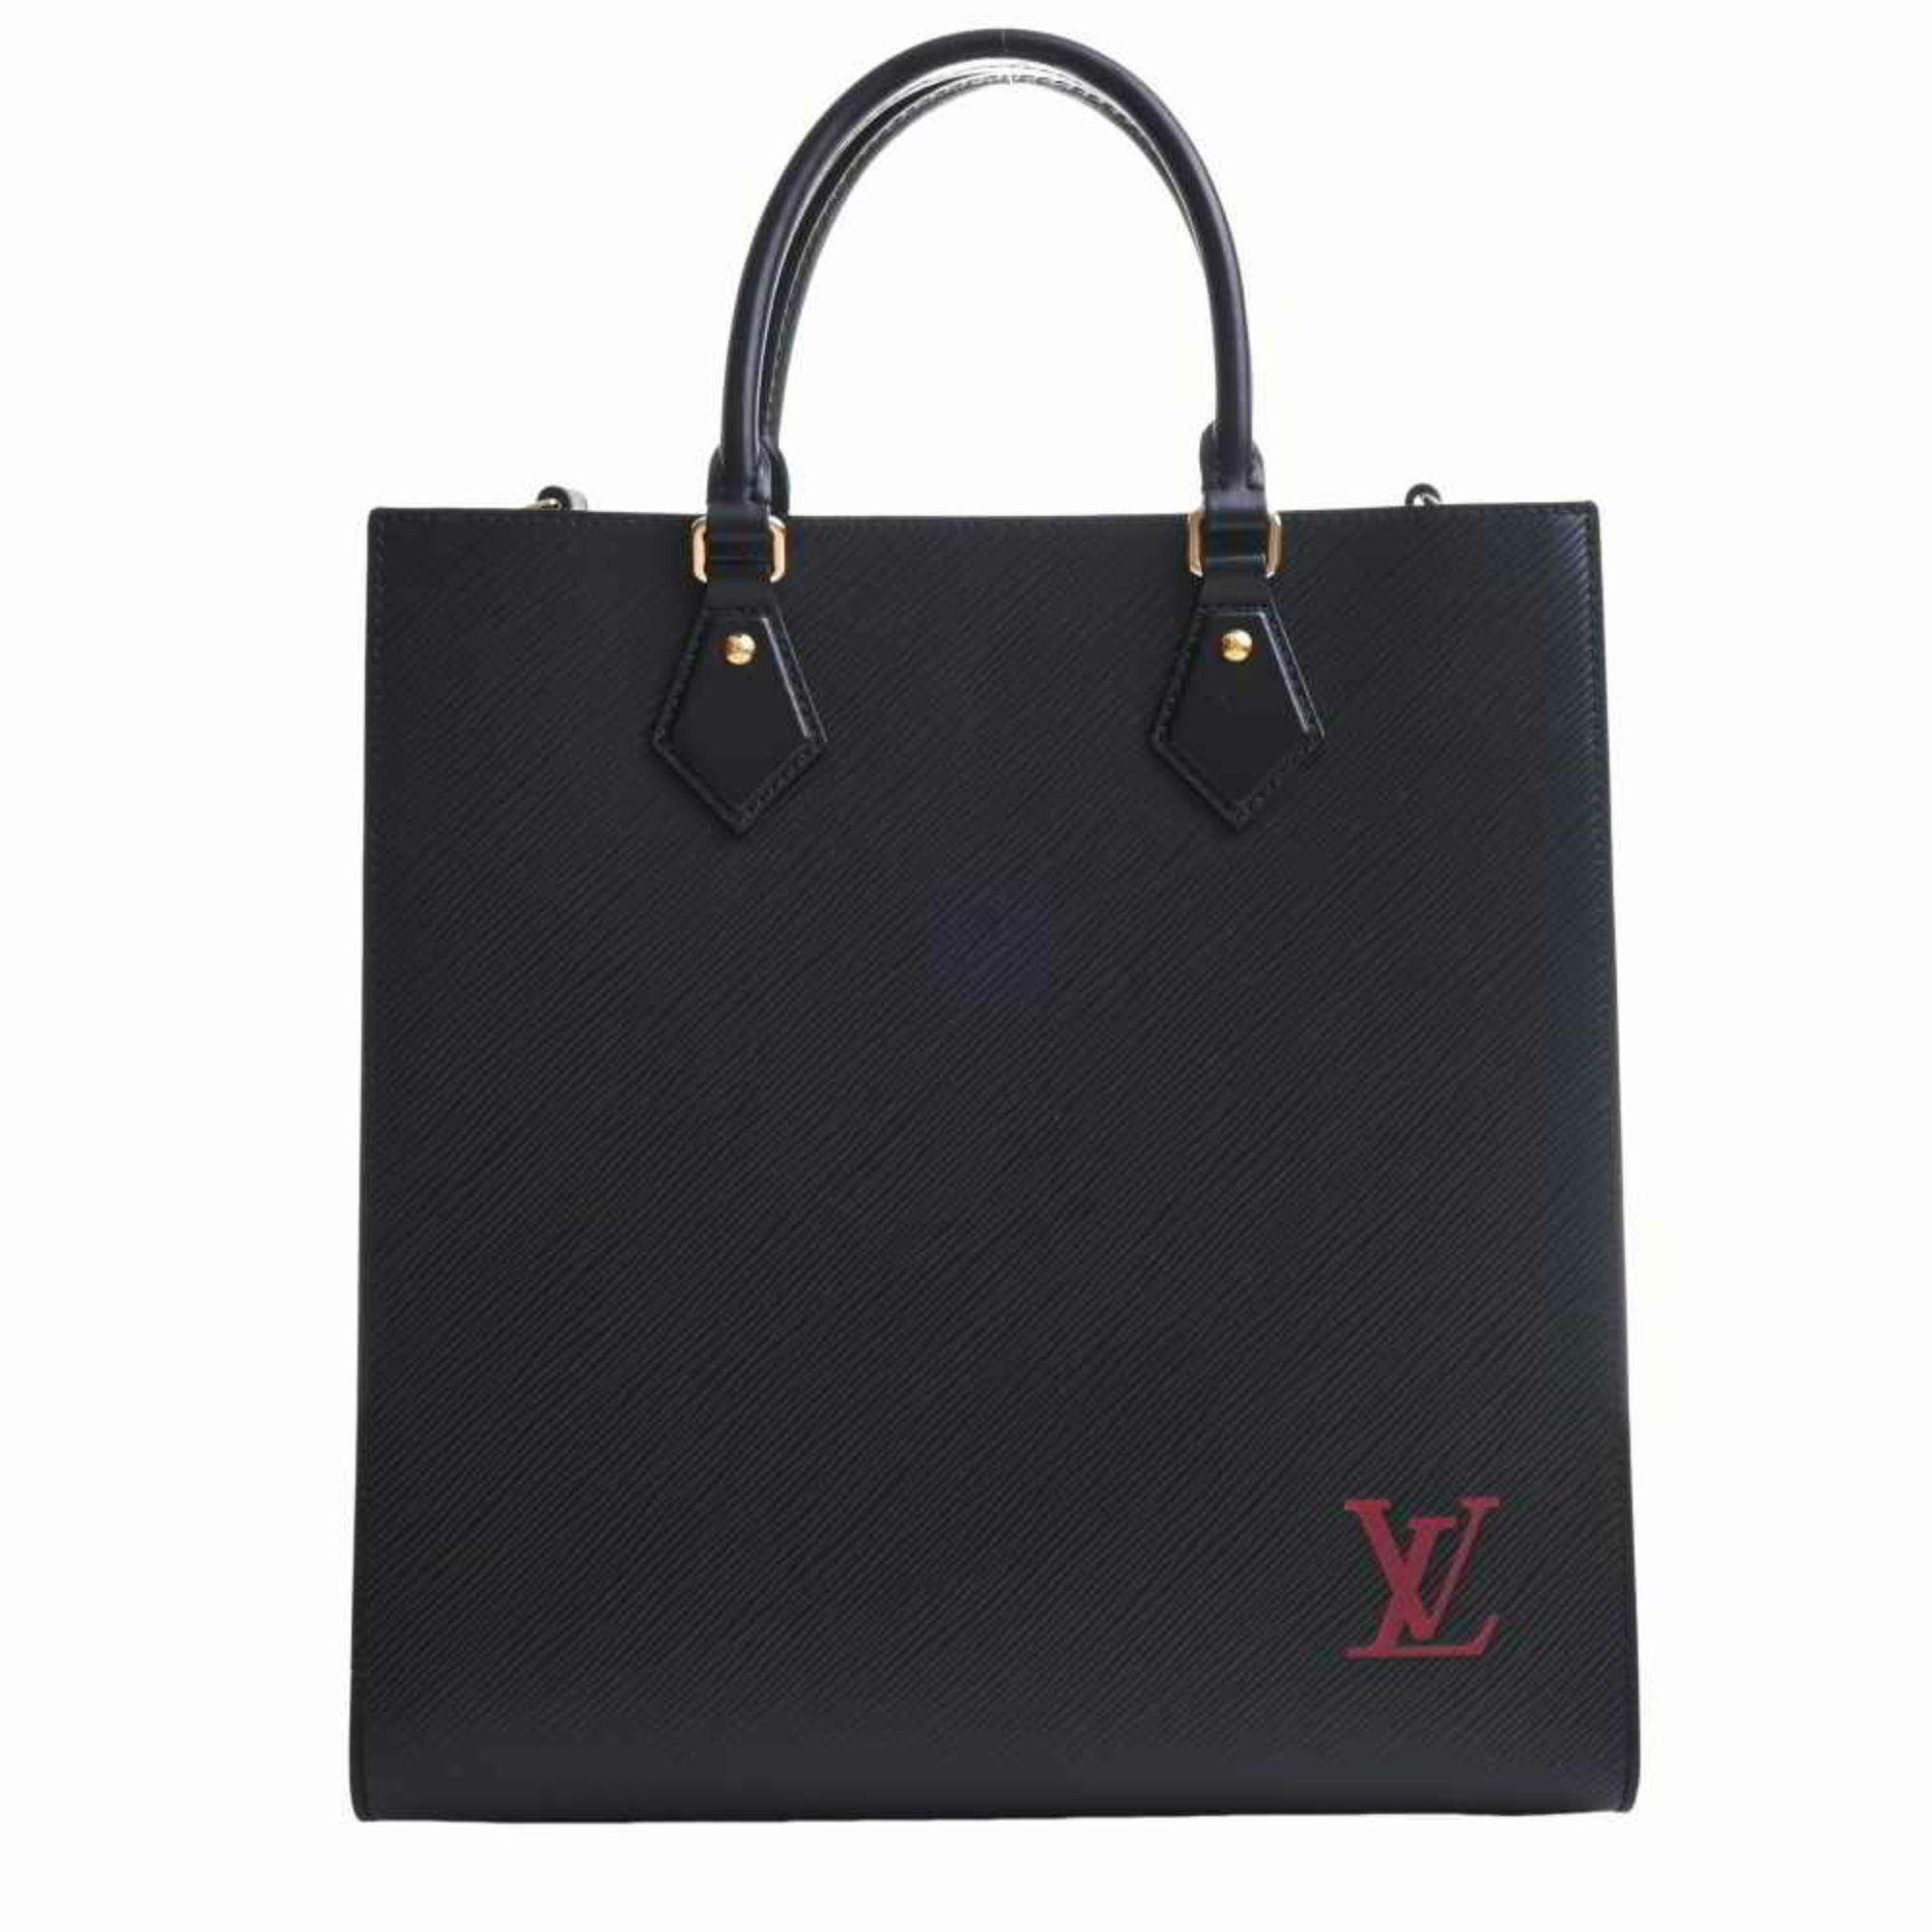 Louis+Vuitton+Hina+Tote+MM+Black+Leather for sale online